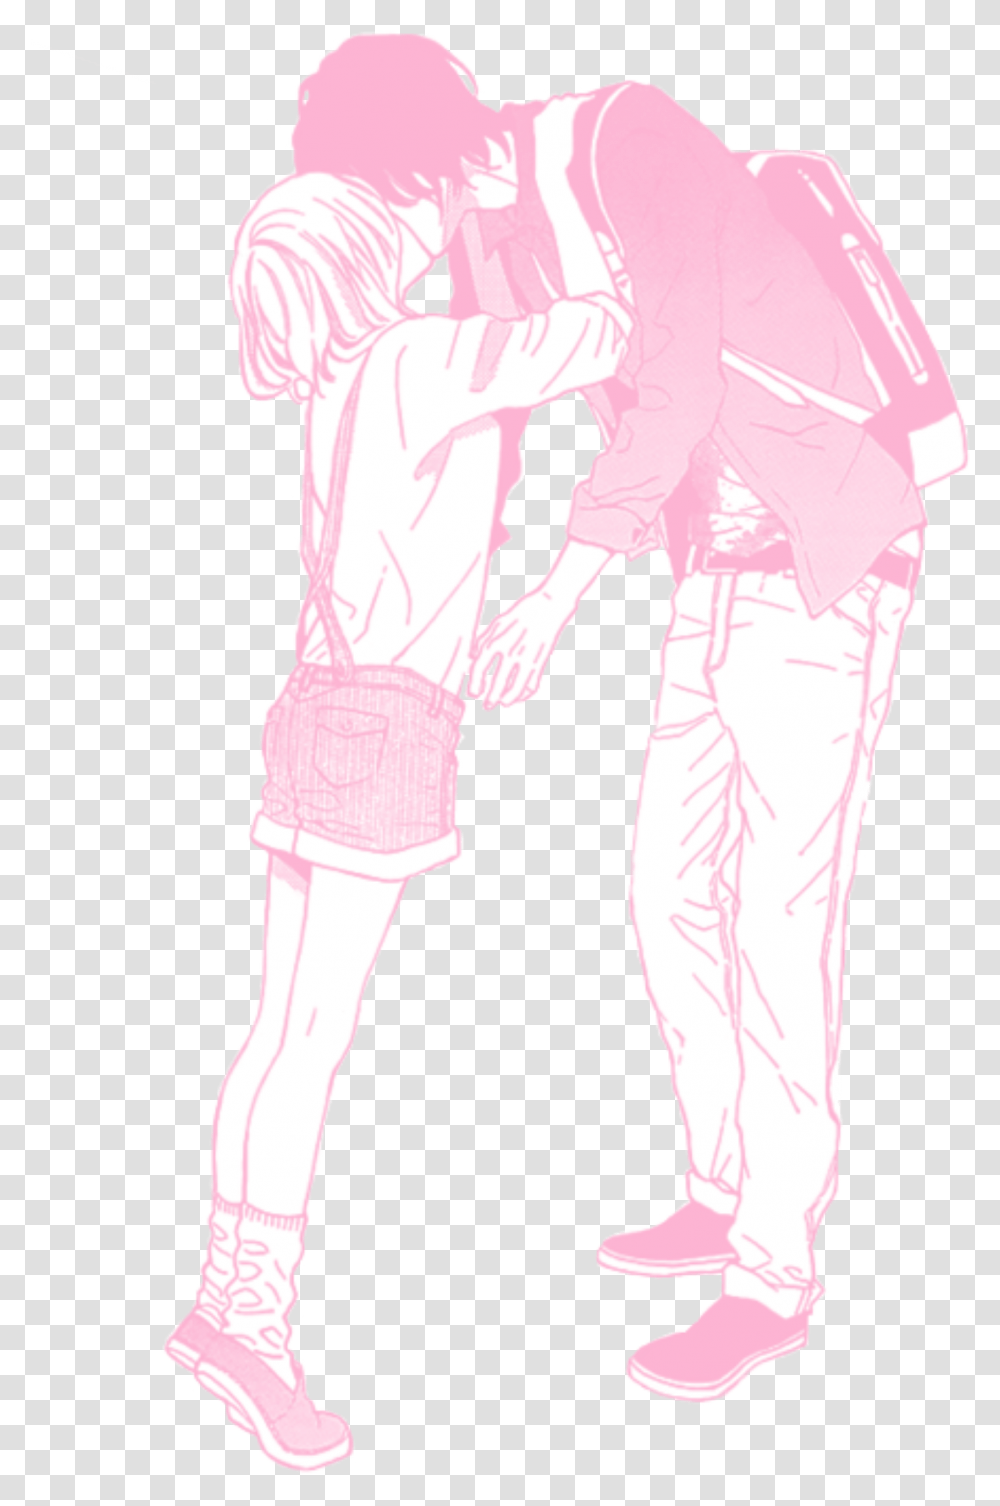 Pink Pastel Manga Anime Couple Love Love Anime Couple Background, Person, Architecture, Building, Clothing Transparent Png